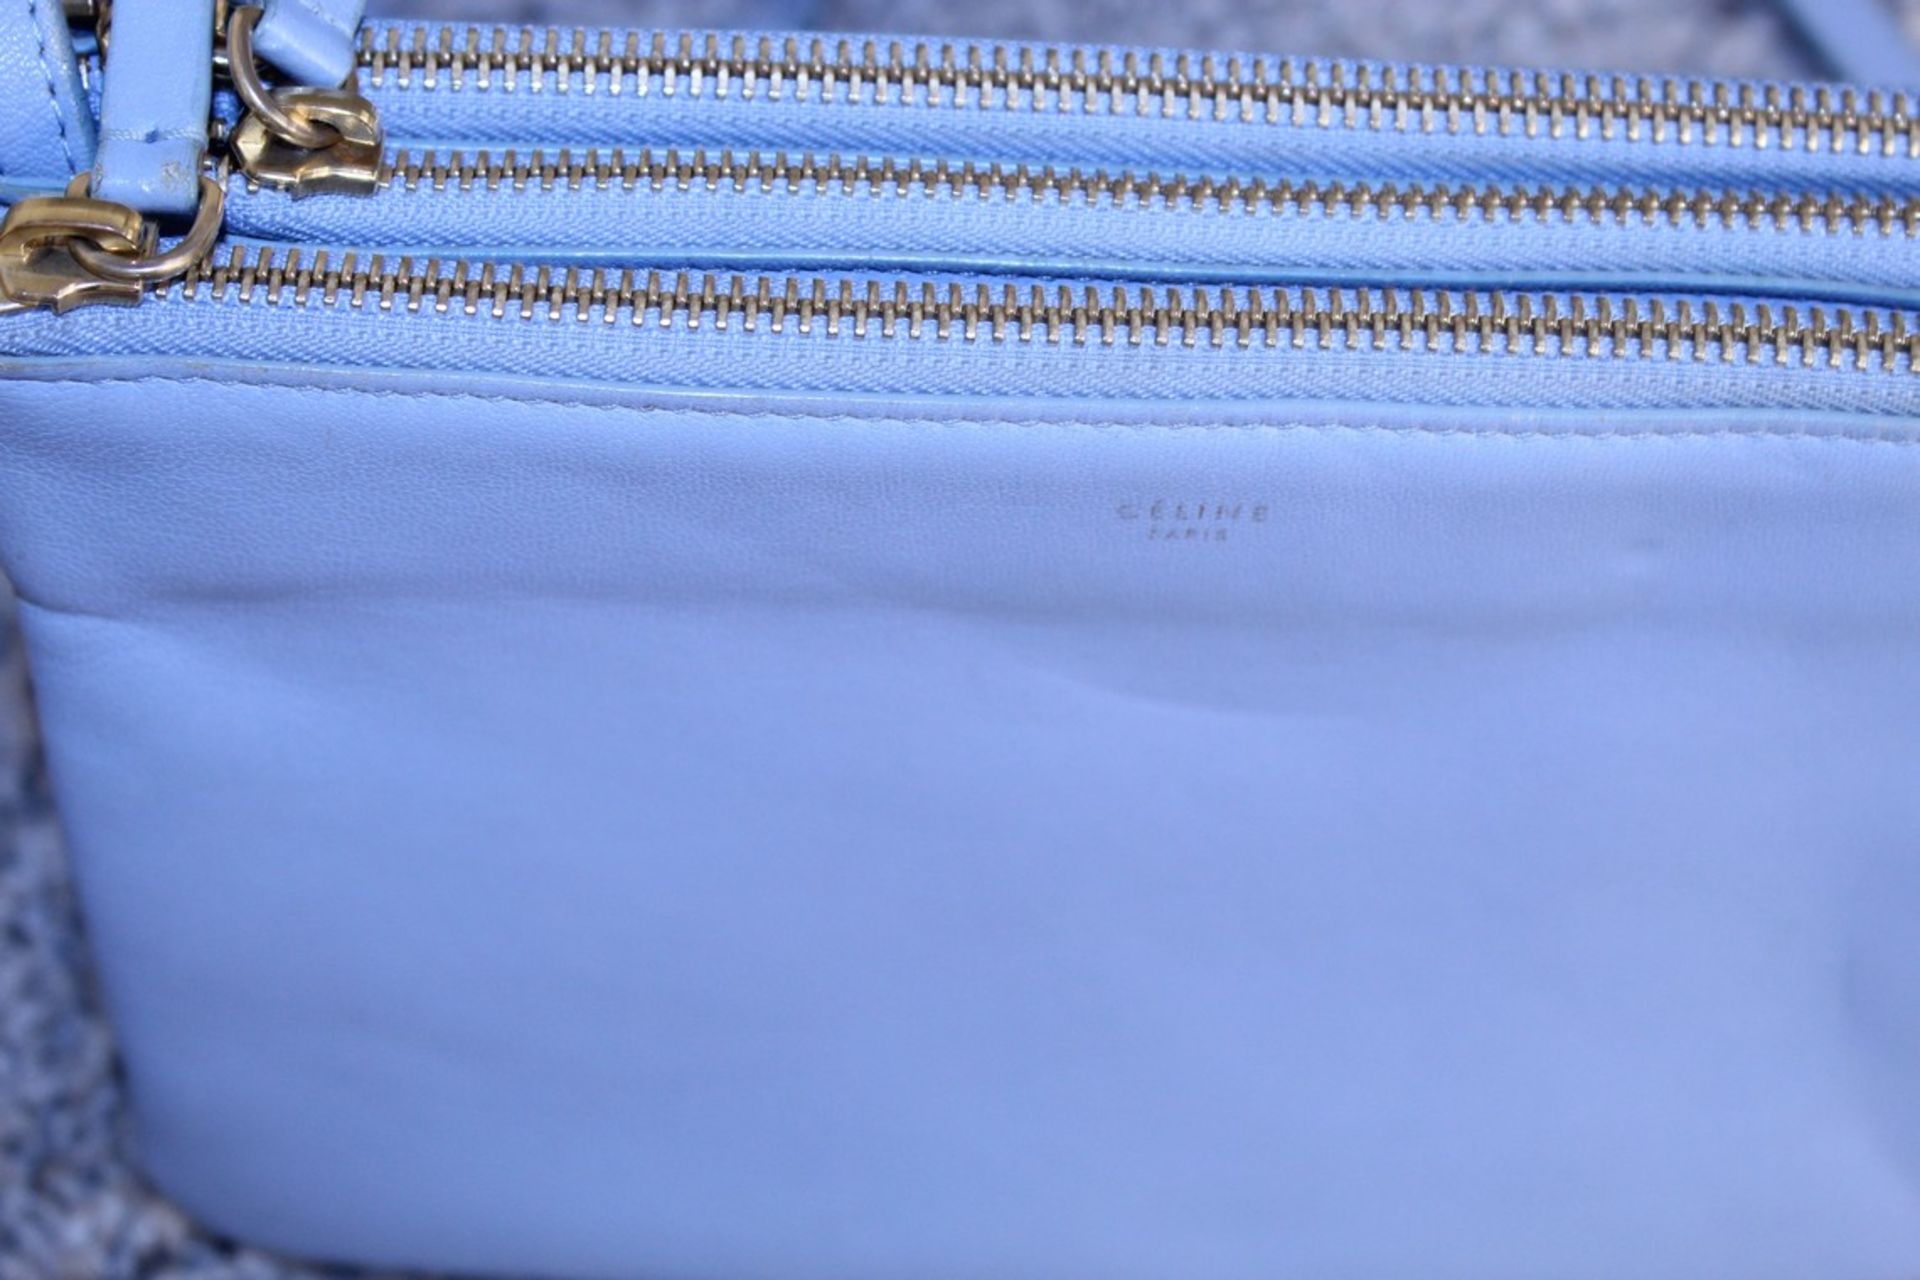 RRP £890 Celine Small Shoulder Bag, Blue Small Grained Claf Leather With Blue Leater Handles. - Image 2 of 4